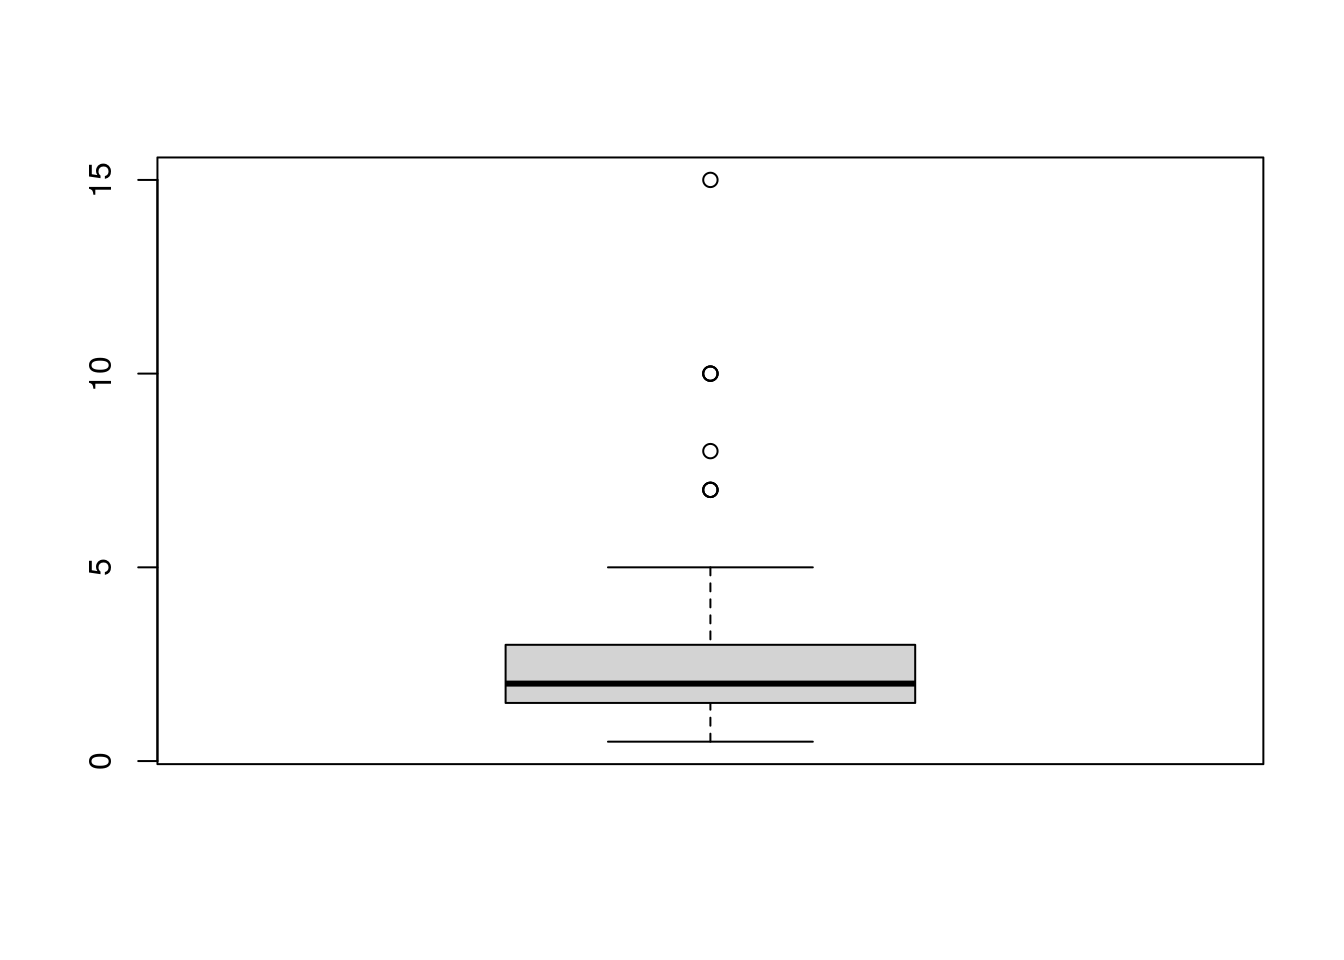 The produced box plot in Base R.